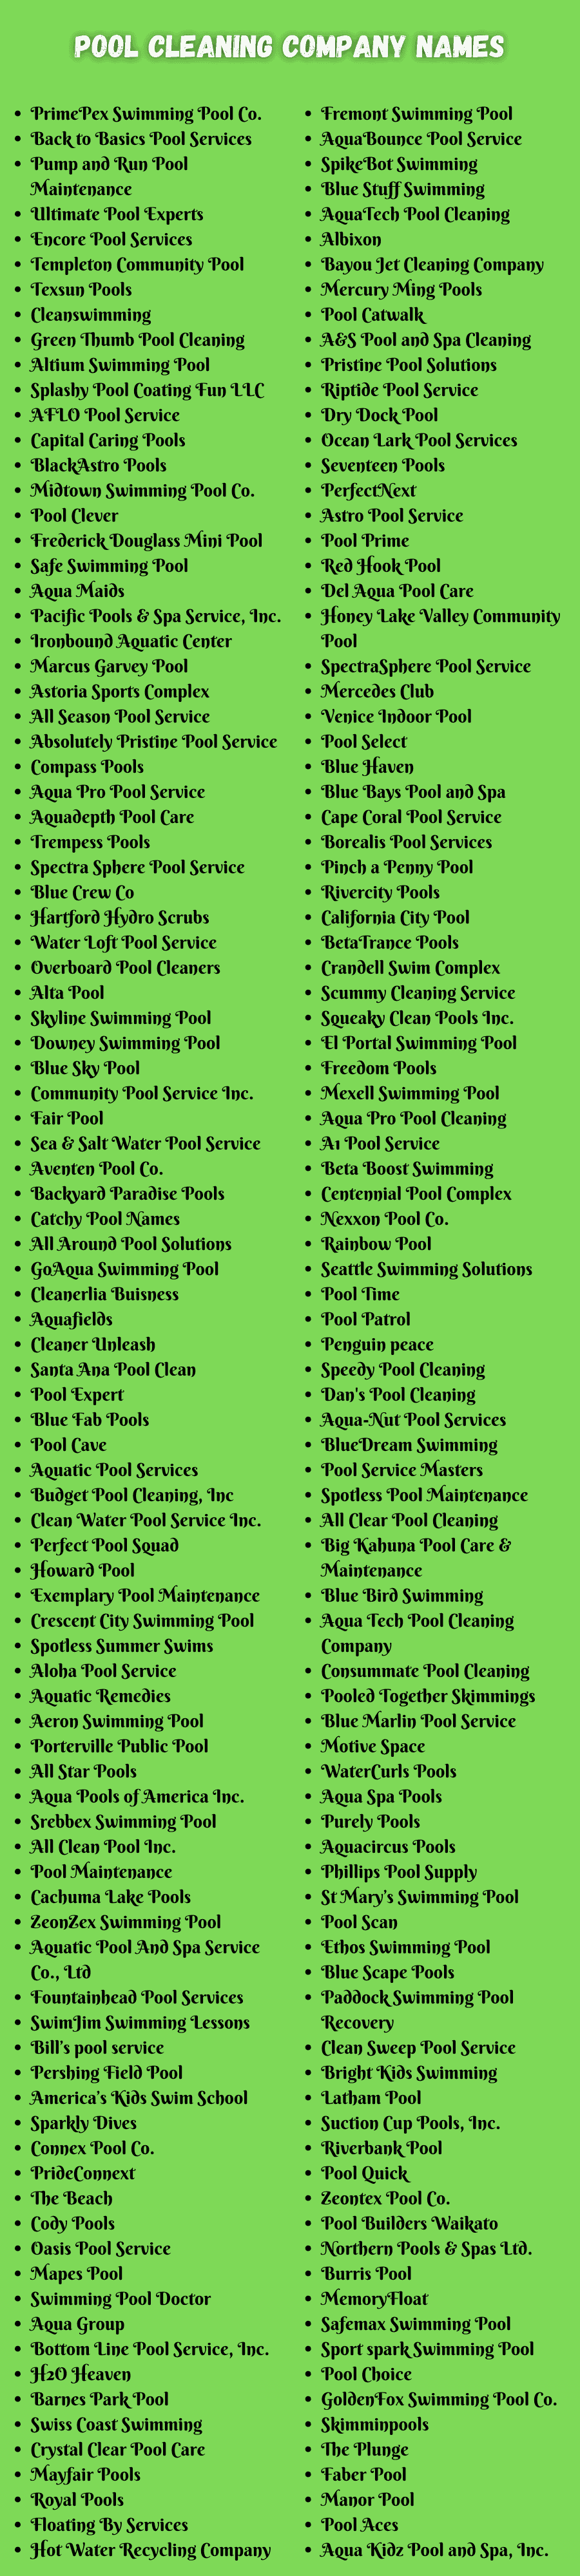 Pool Cleaning Company Names